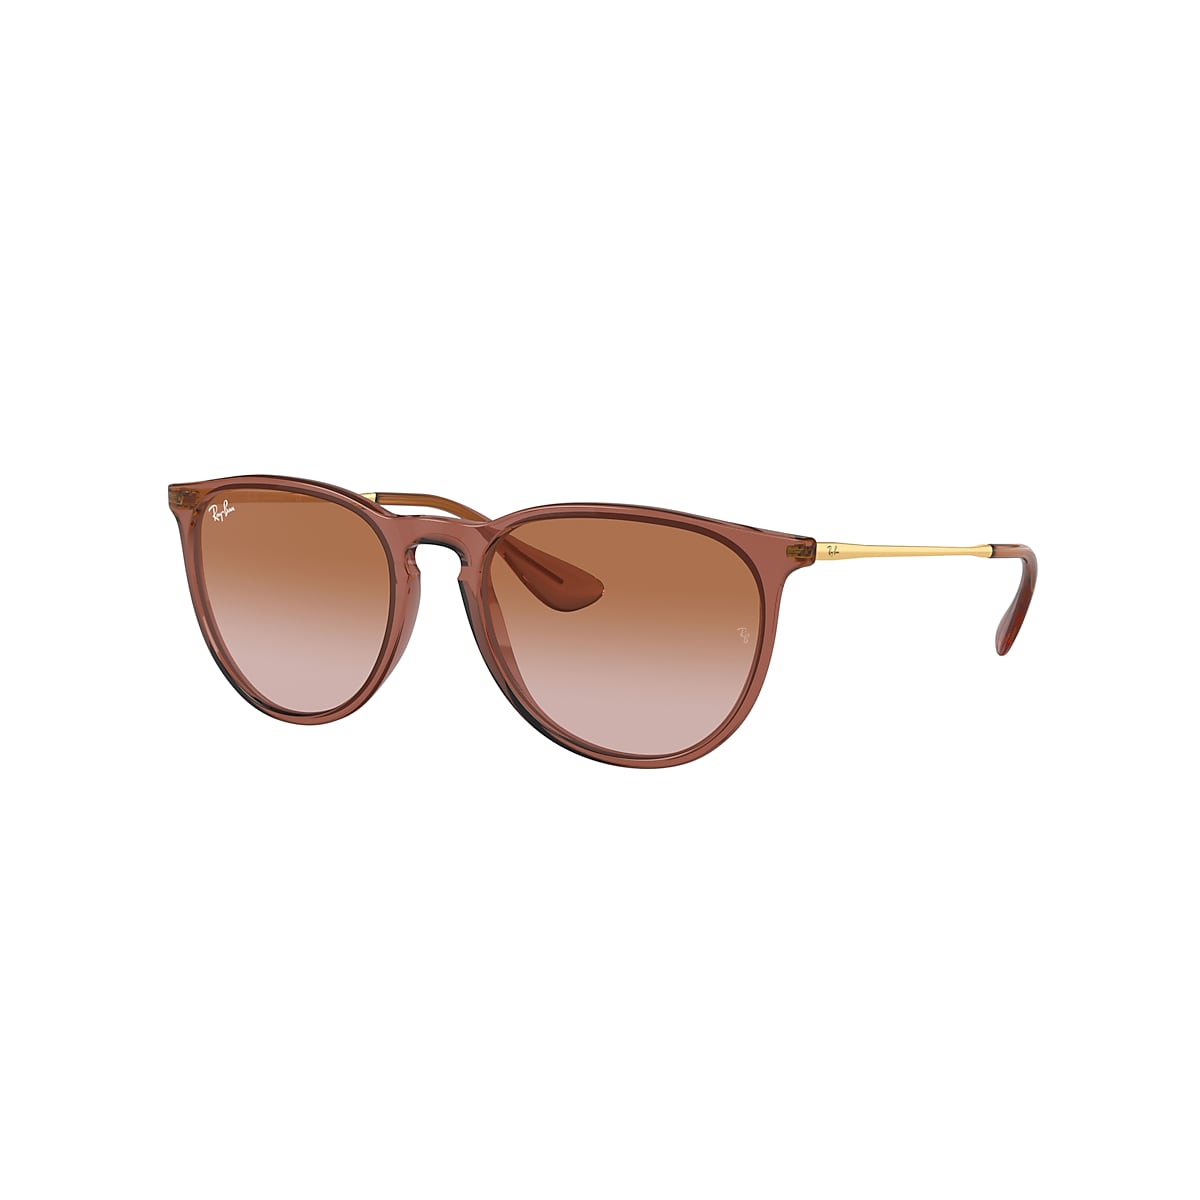 ERIKA CLASSIC Sunglasses in Transparent Light Brown and Brown 